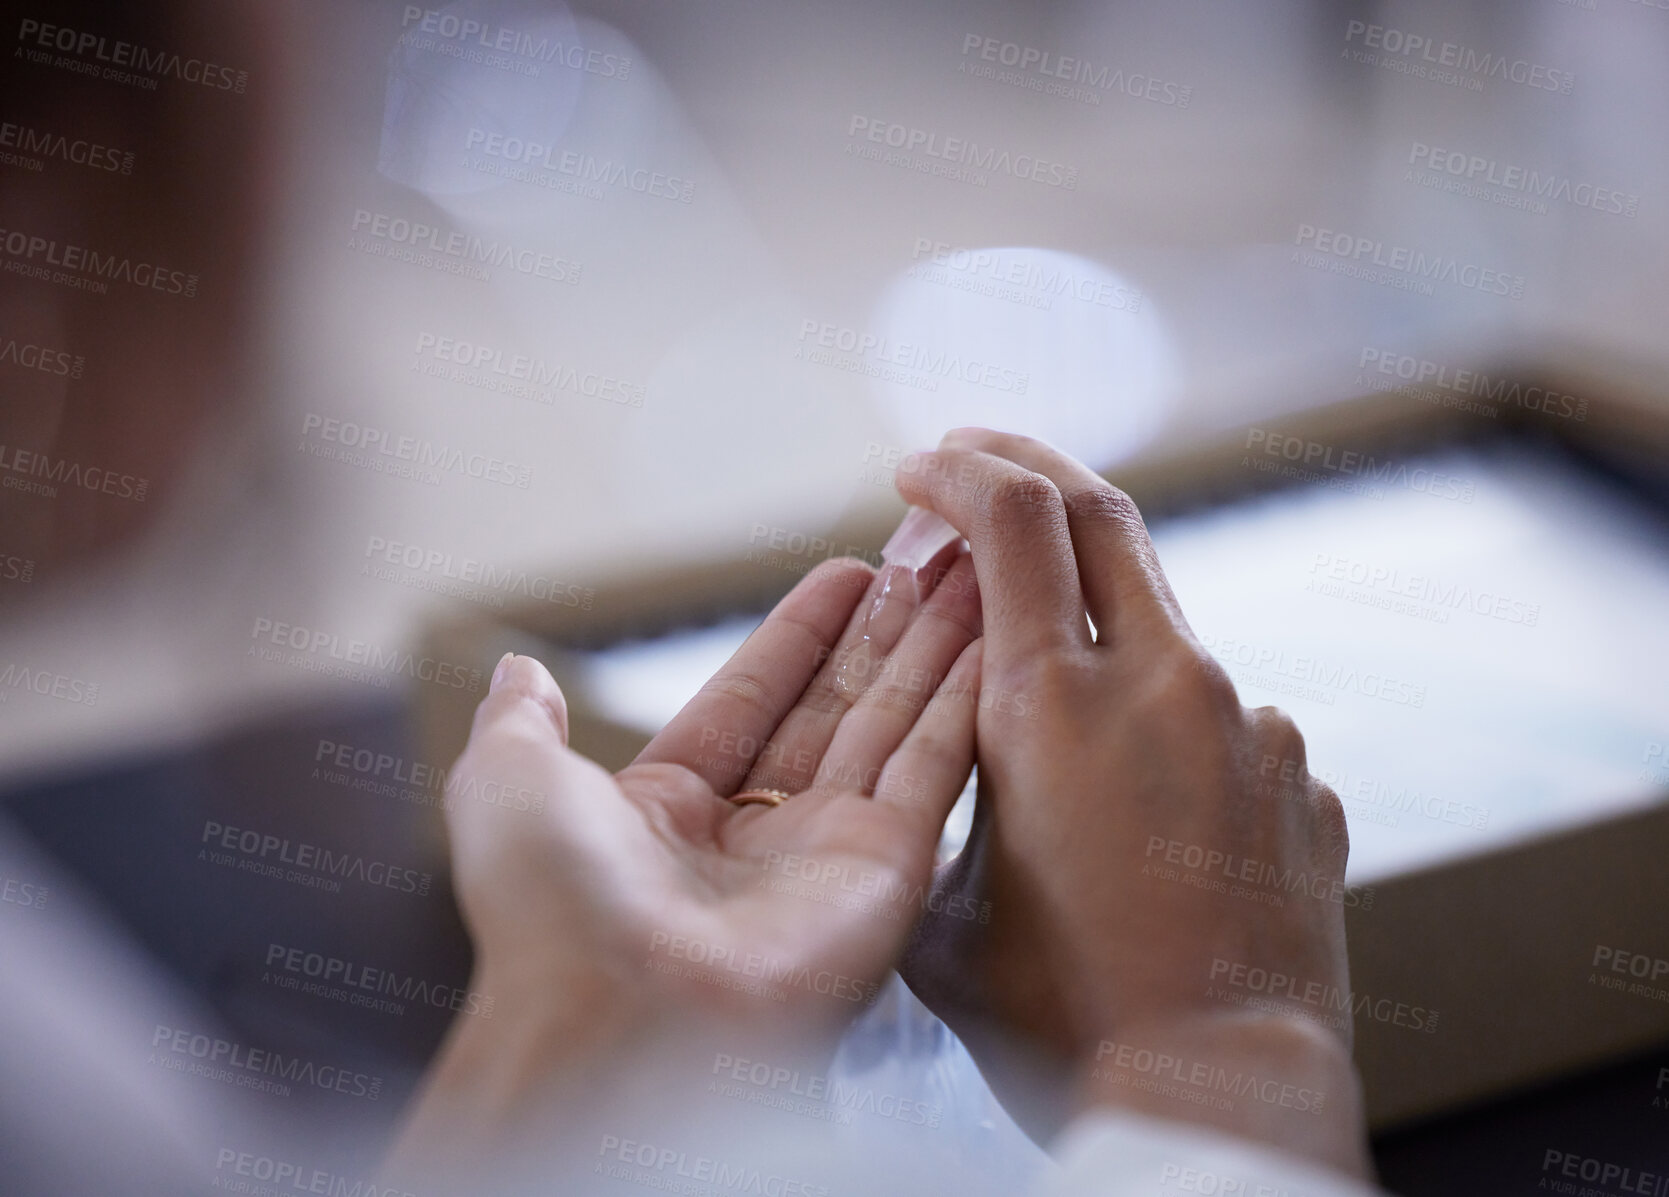 Buy stock photo Shot of an unrecognizable businessperson sanitising their hands at work